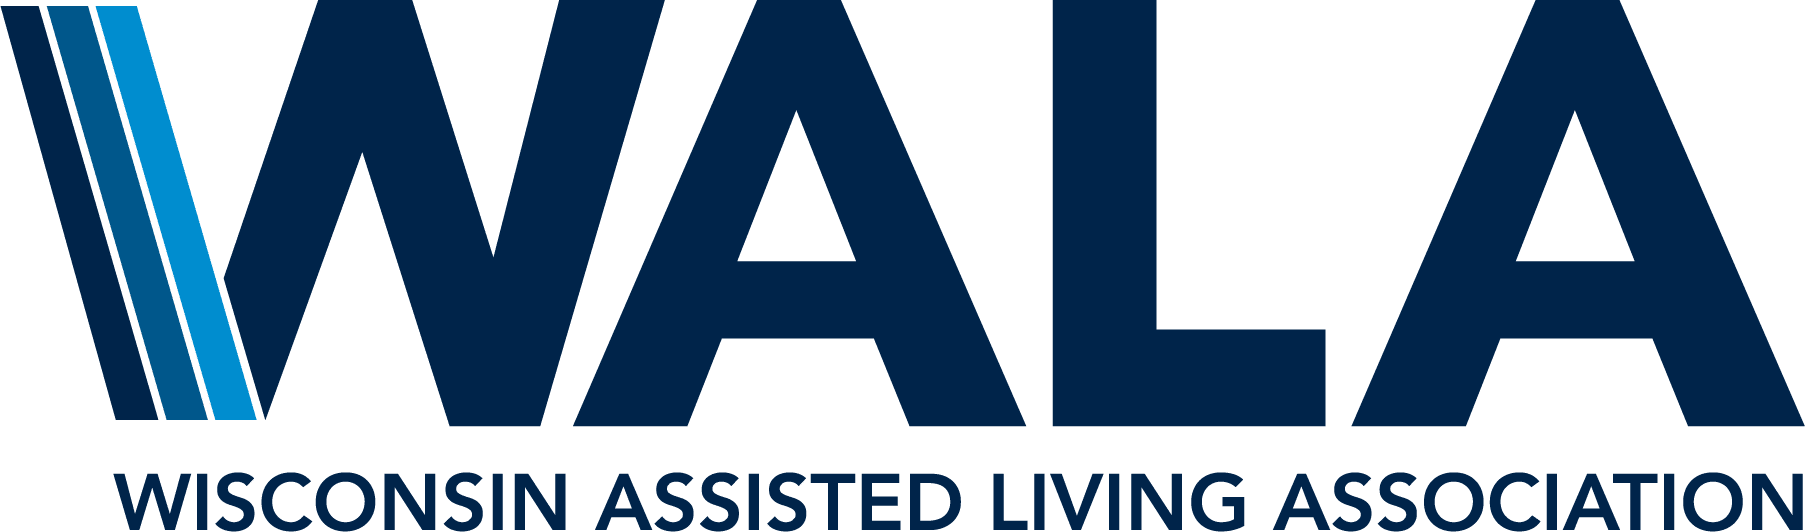 Logo for Wisconsin Assisted Living Association